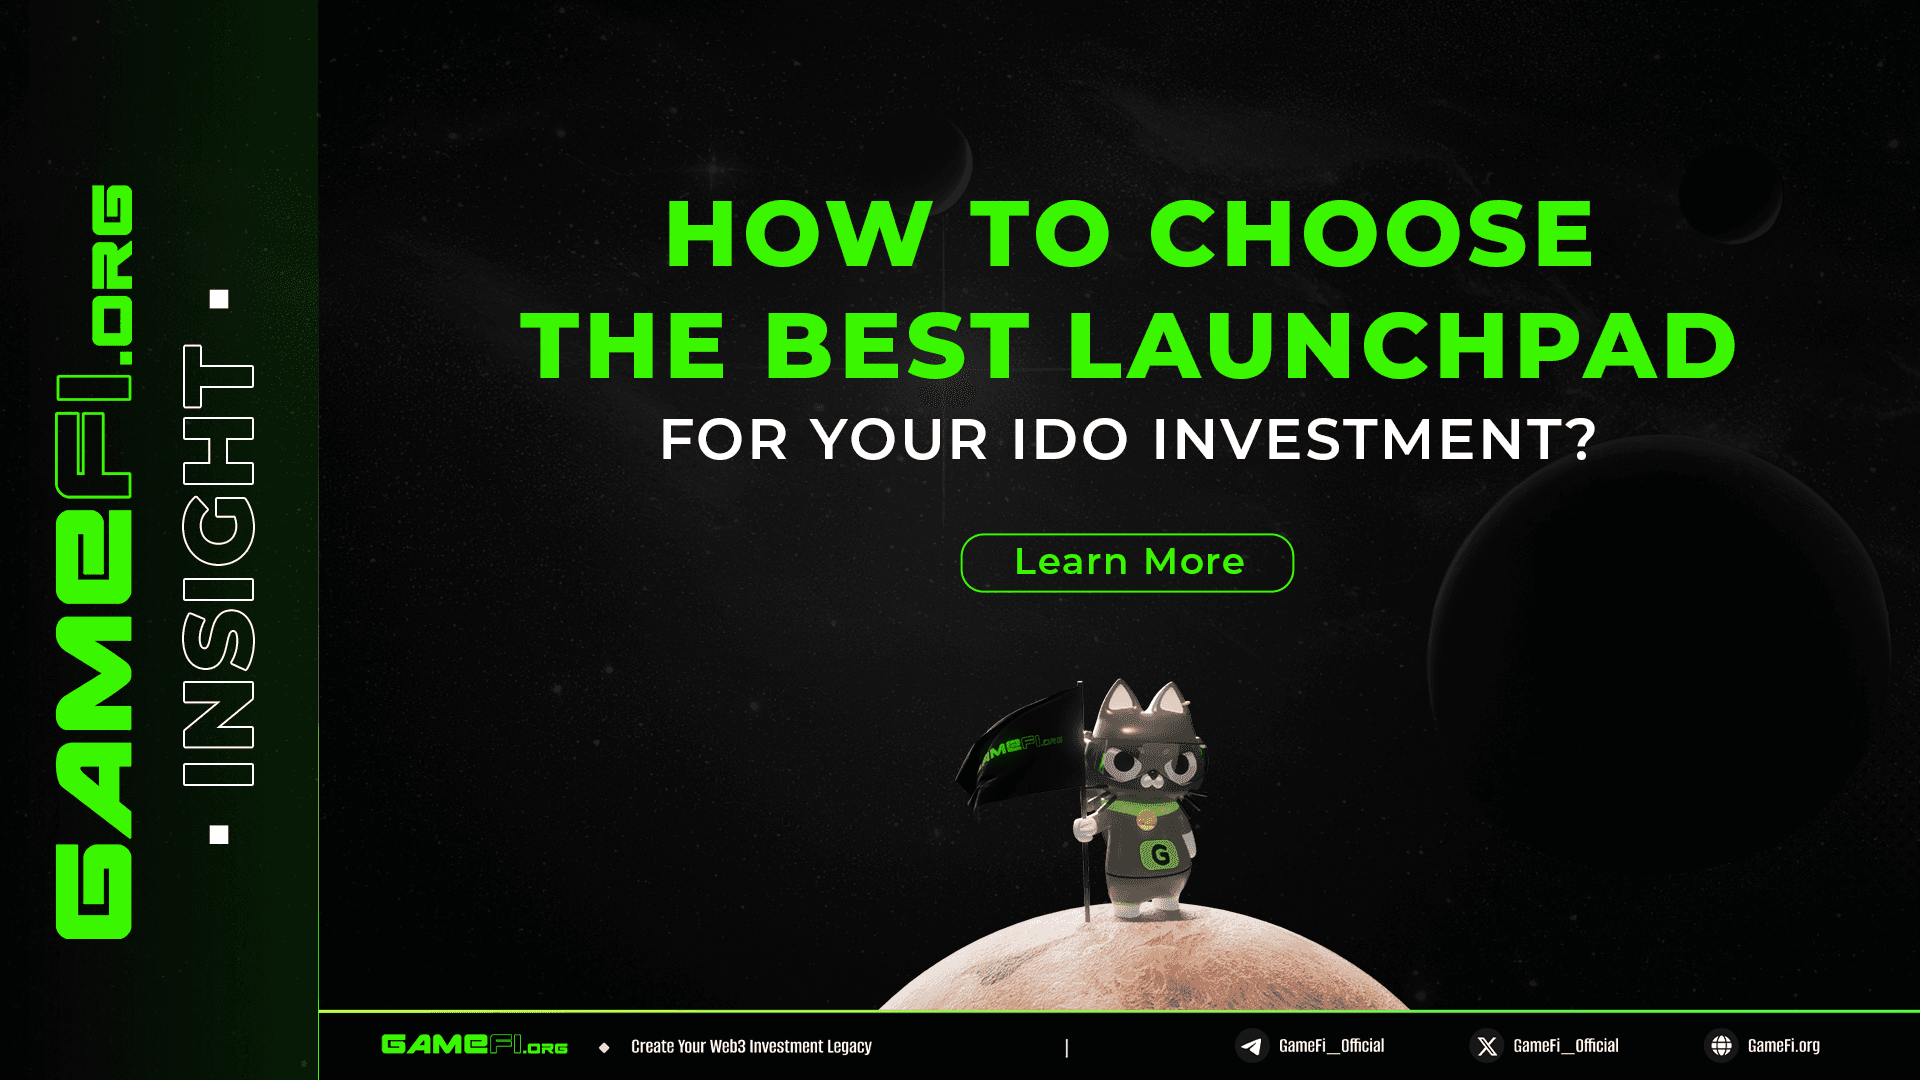 How to Choose the Best Launchpad for Your IDO Investment?